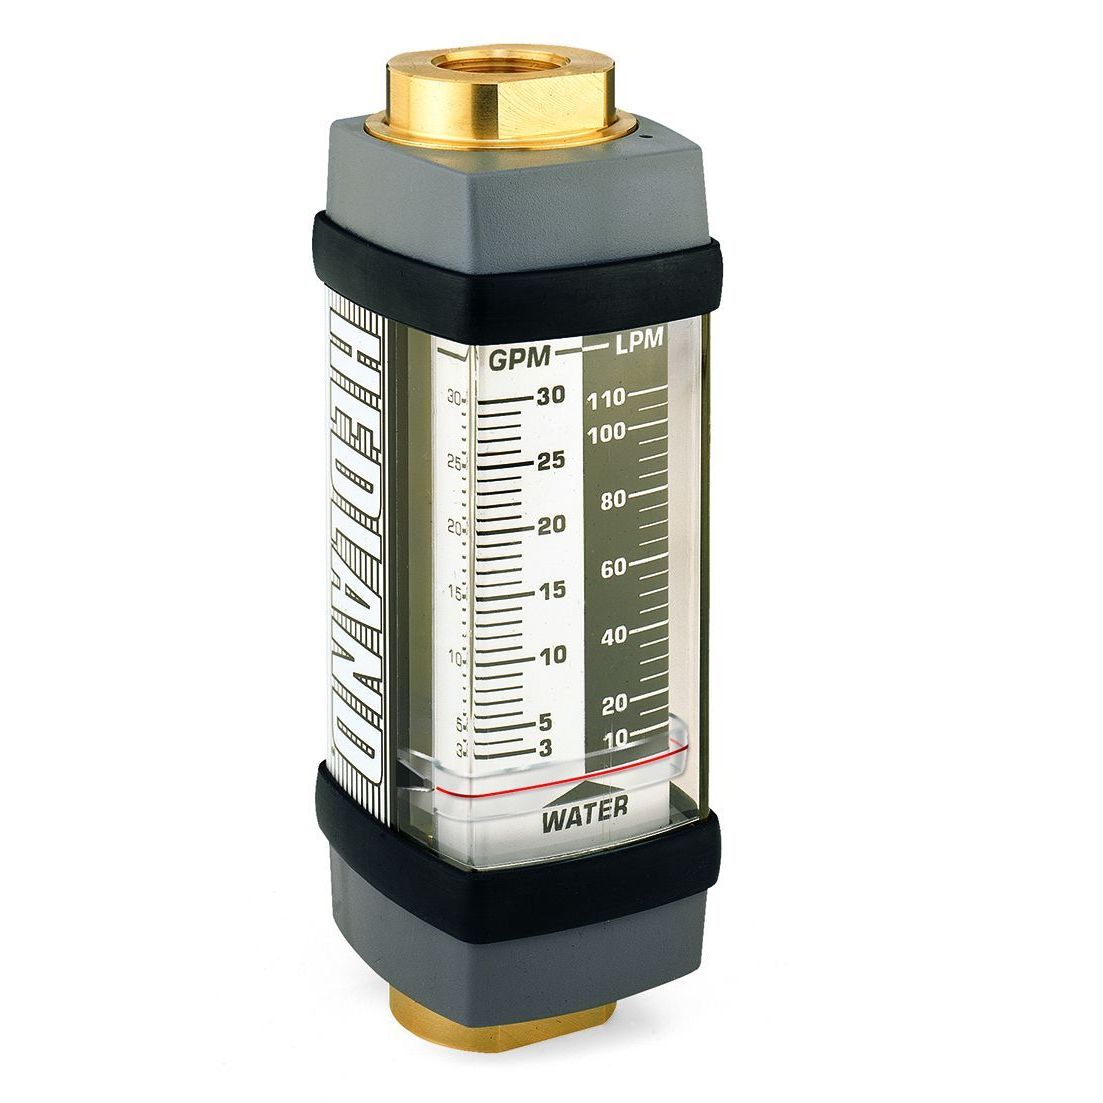 H804B-100 : Hedland 3500psi Brass Flow Meter for Water, #20 SAE (1.25), 10 to 100 GPM